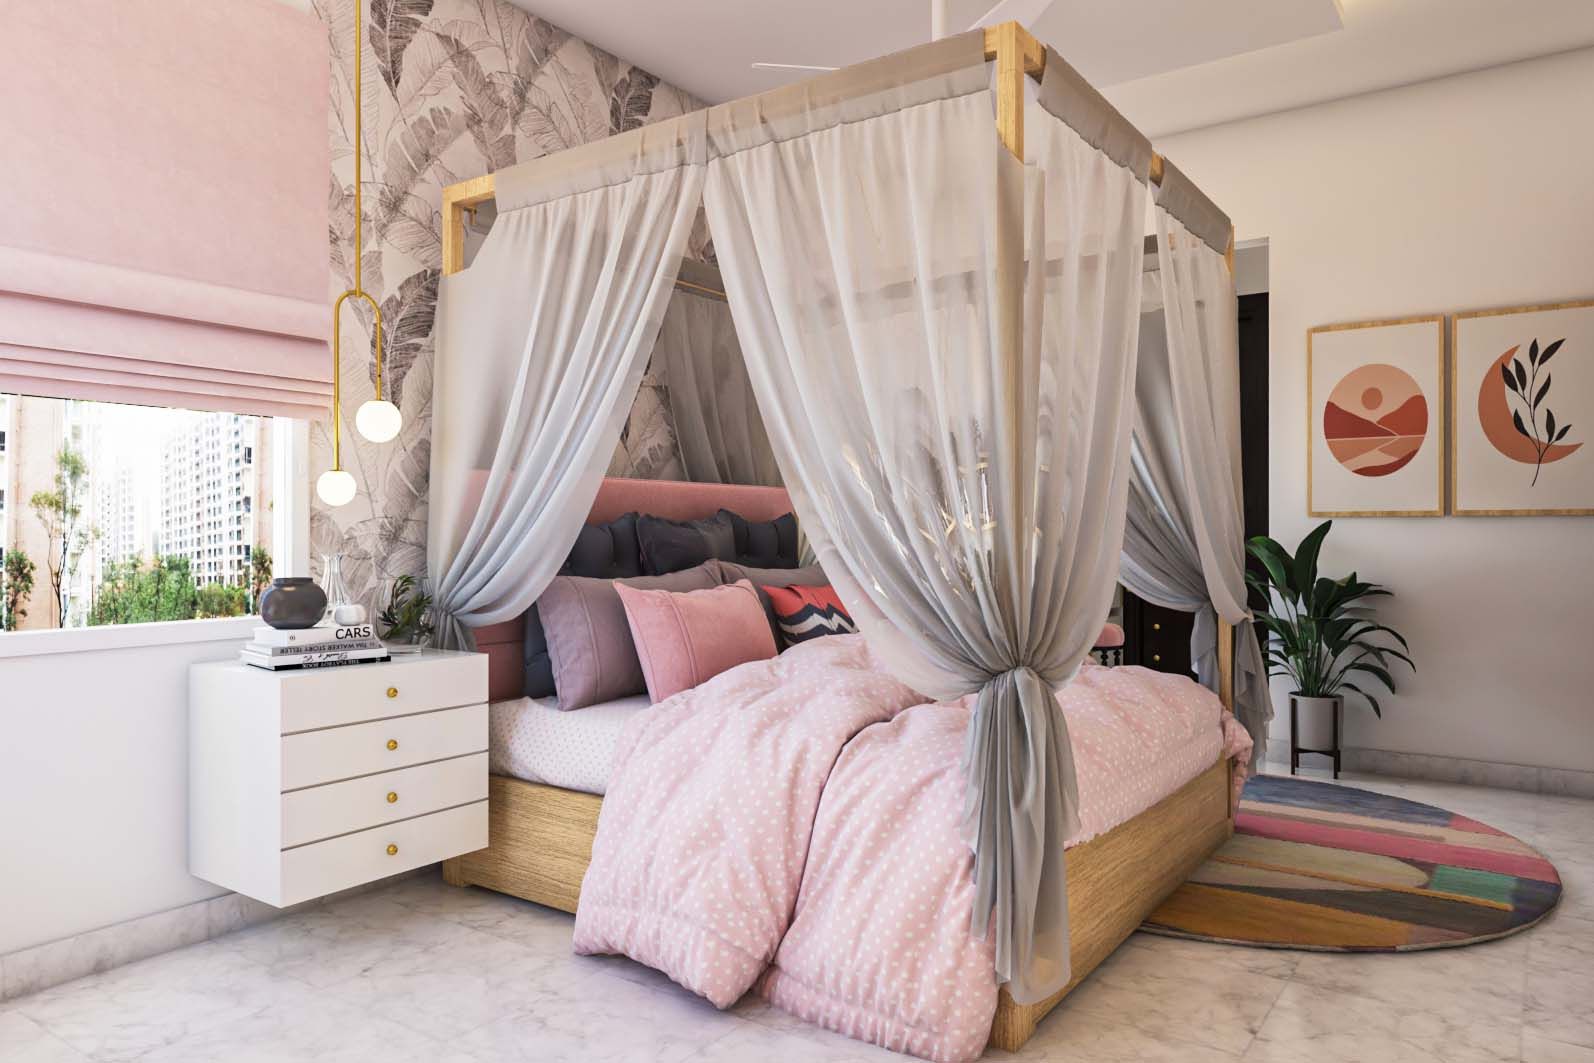 Beautiful Pink And Themed Kid's Bedroom With Canopy Bed